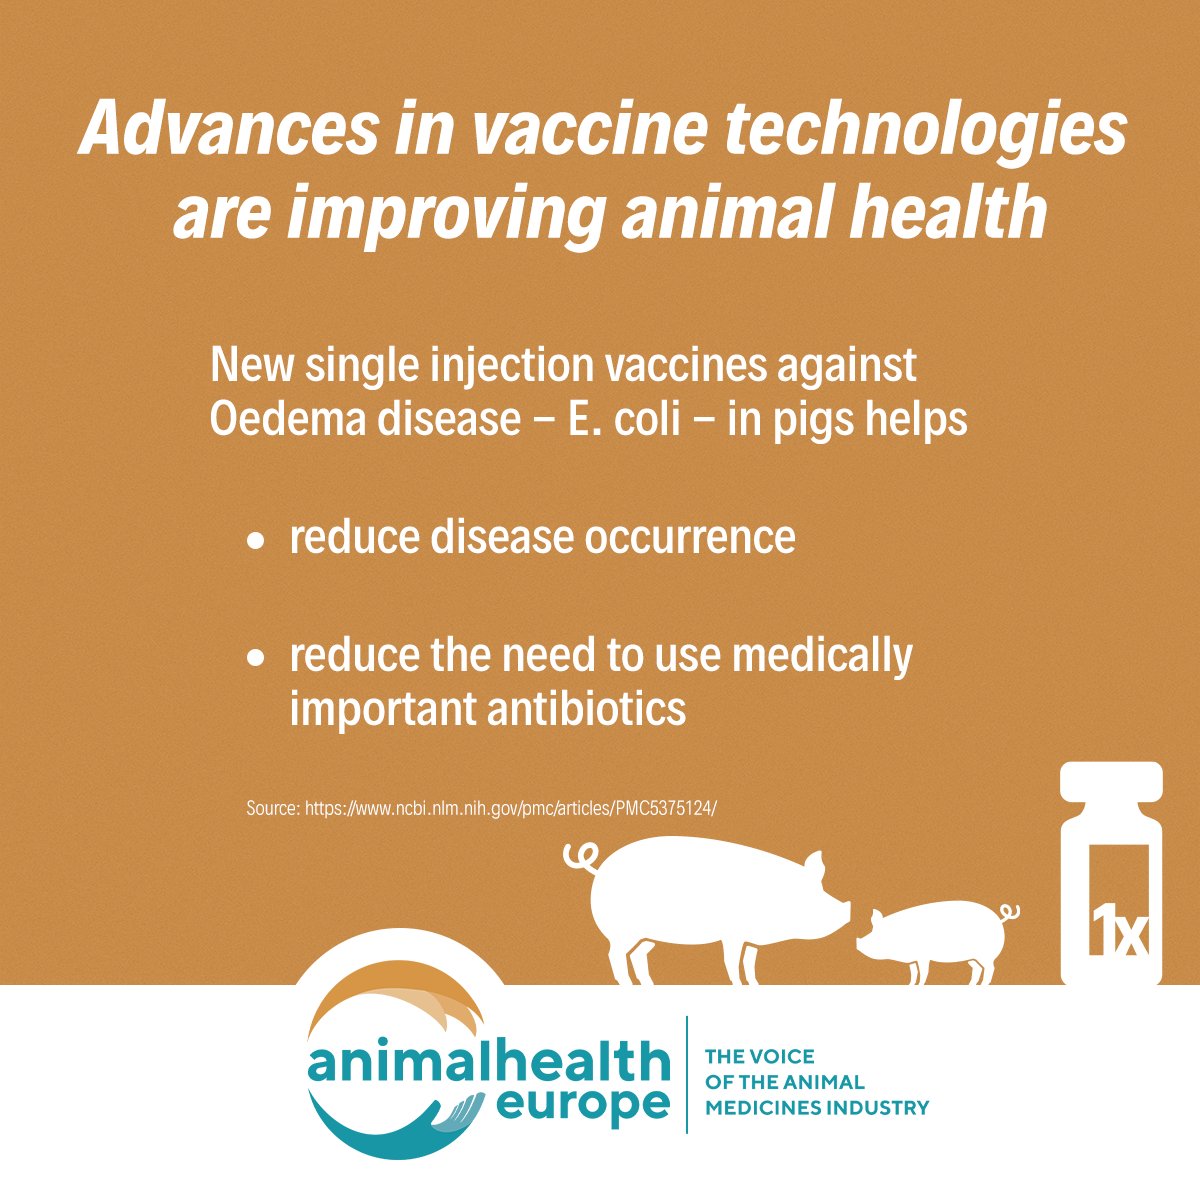 A new type of vaccine against E-coli in pigs helps reduce the need to use #antibiotics 💉🐖  

Innovations in #AnimalHealth are important to help us address today's challenges ✅